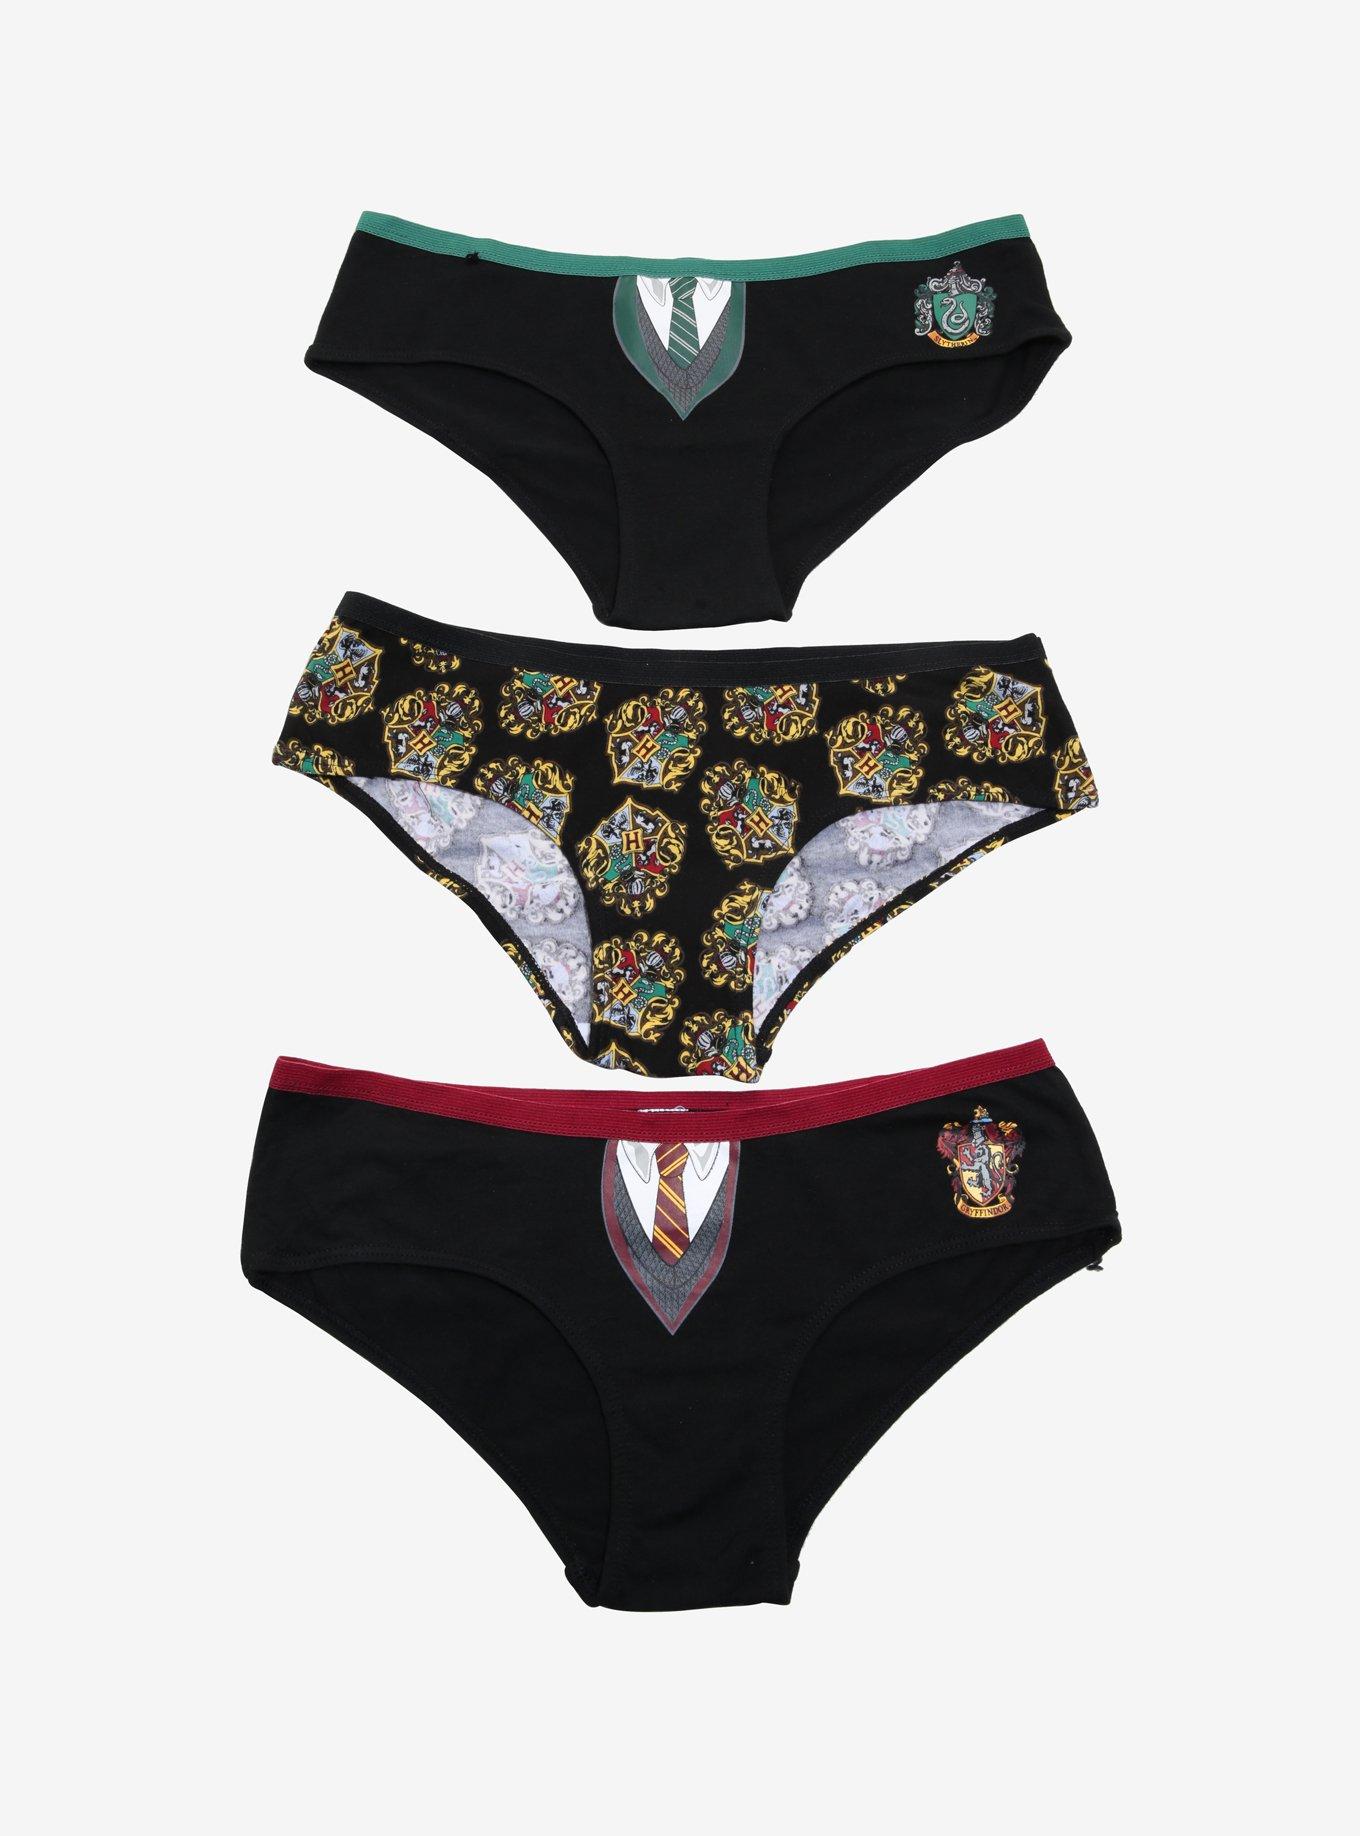 My friend made me a set of Harry Potter panties! : r/harrypotter